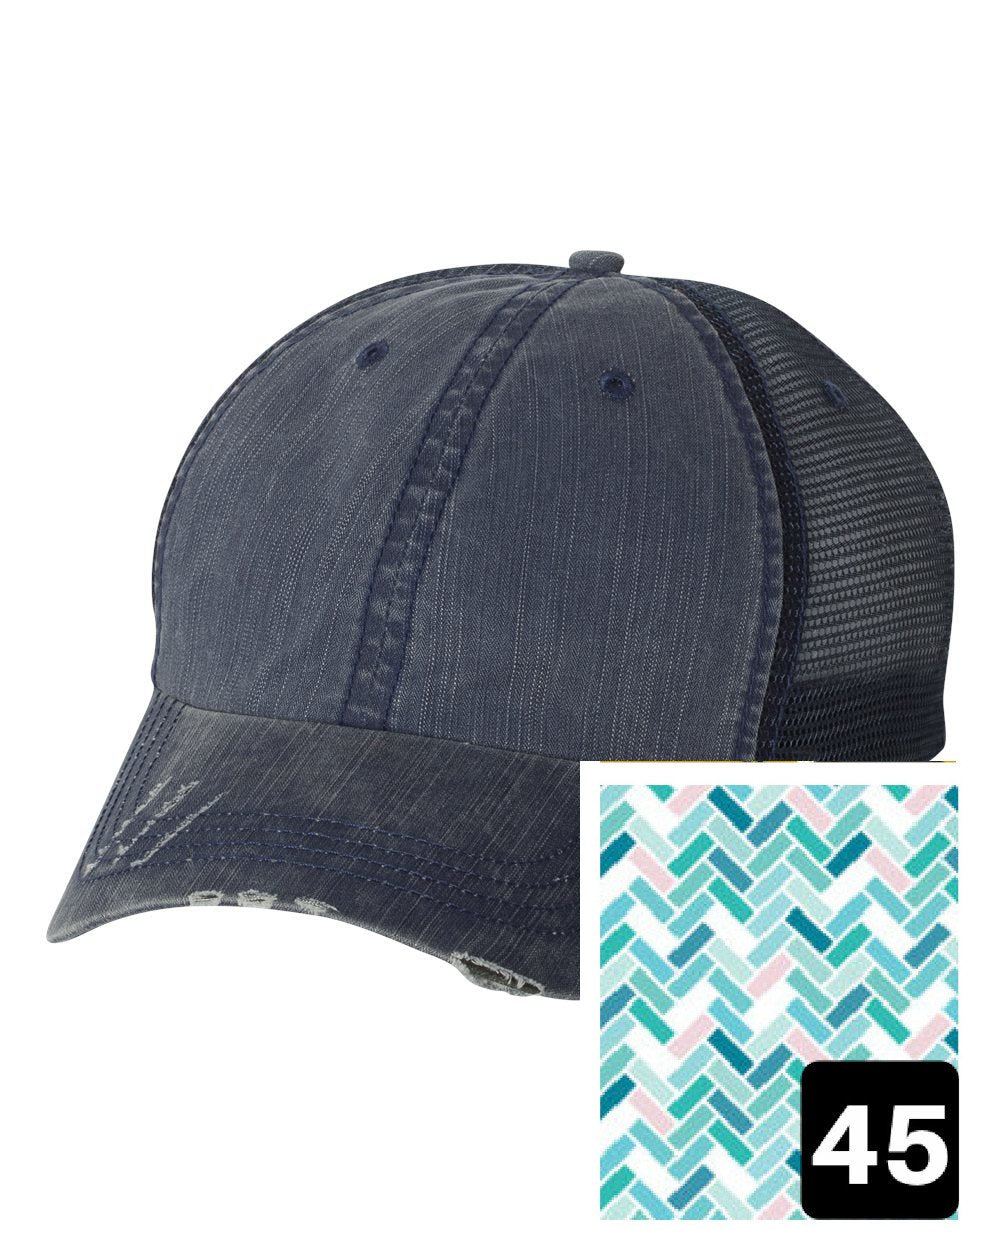 Minnesota Hat - Distressed Ponytail or Messy Bun Hat  - Many Fabric Choices